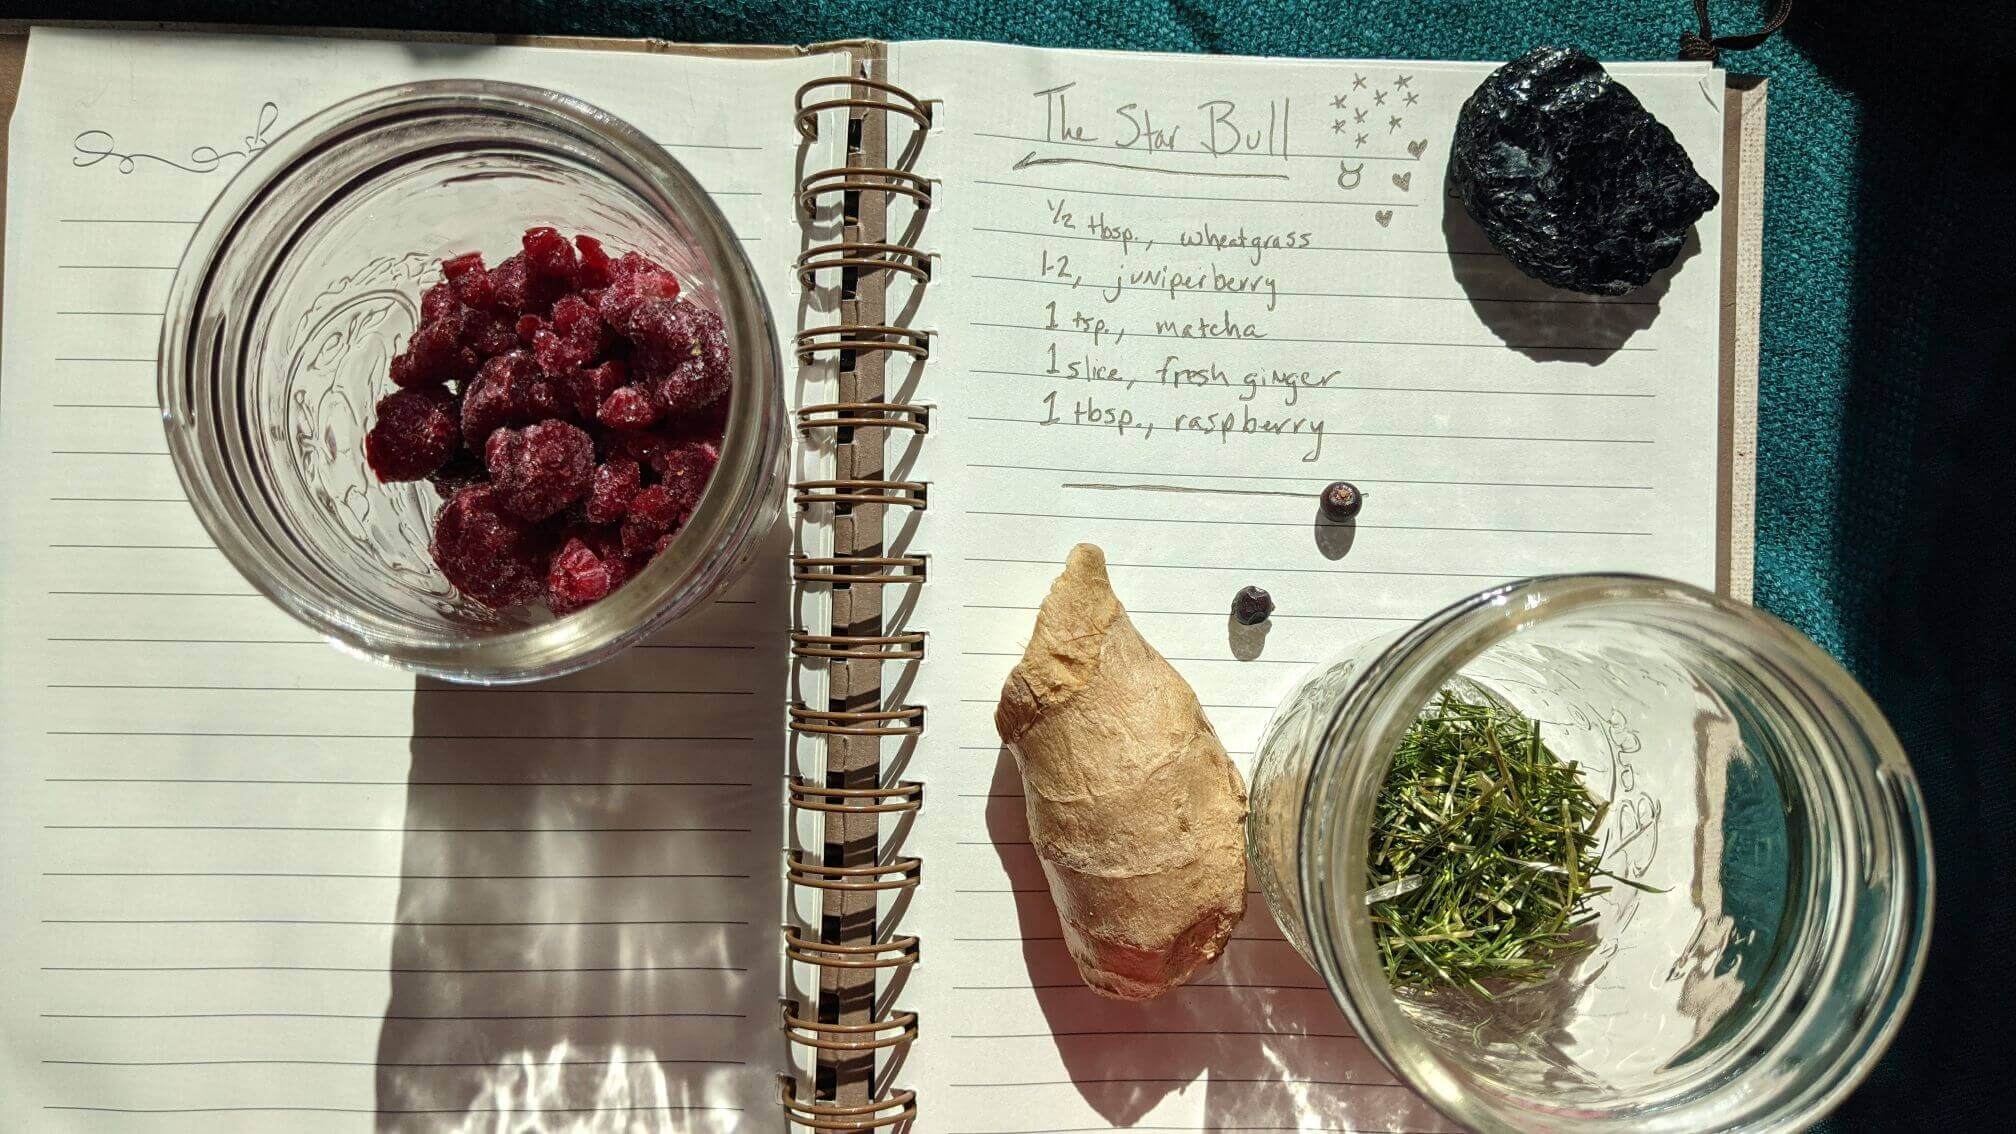 Handwritten recipe shown in bright daylight. Thawing frozen raspberries in a jar, a scattering of juniper berries, fresh ginger, and dehydrated wheatgrass are featured.